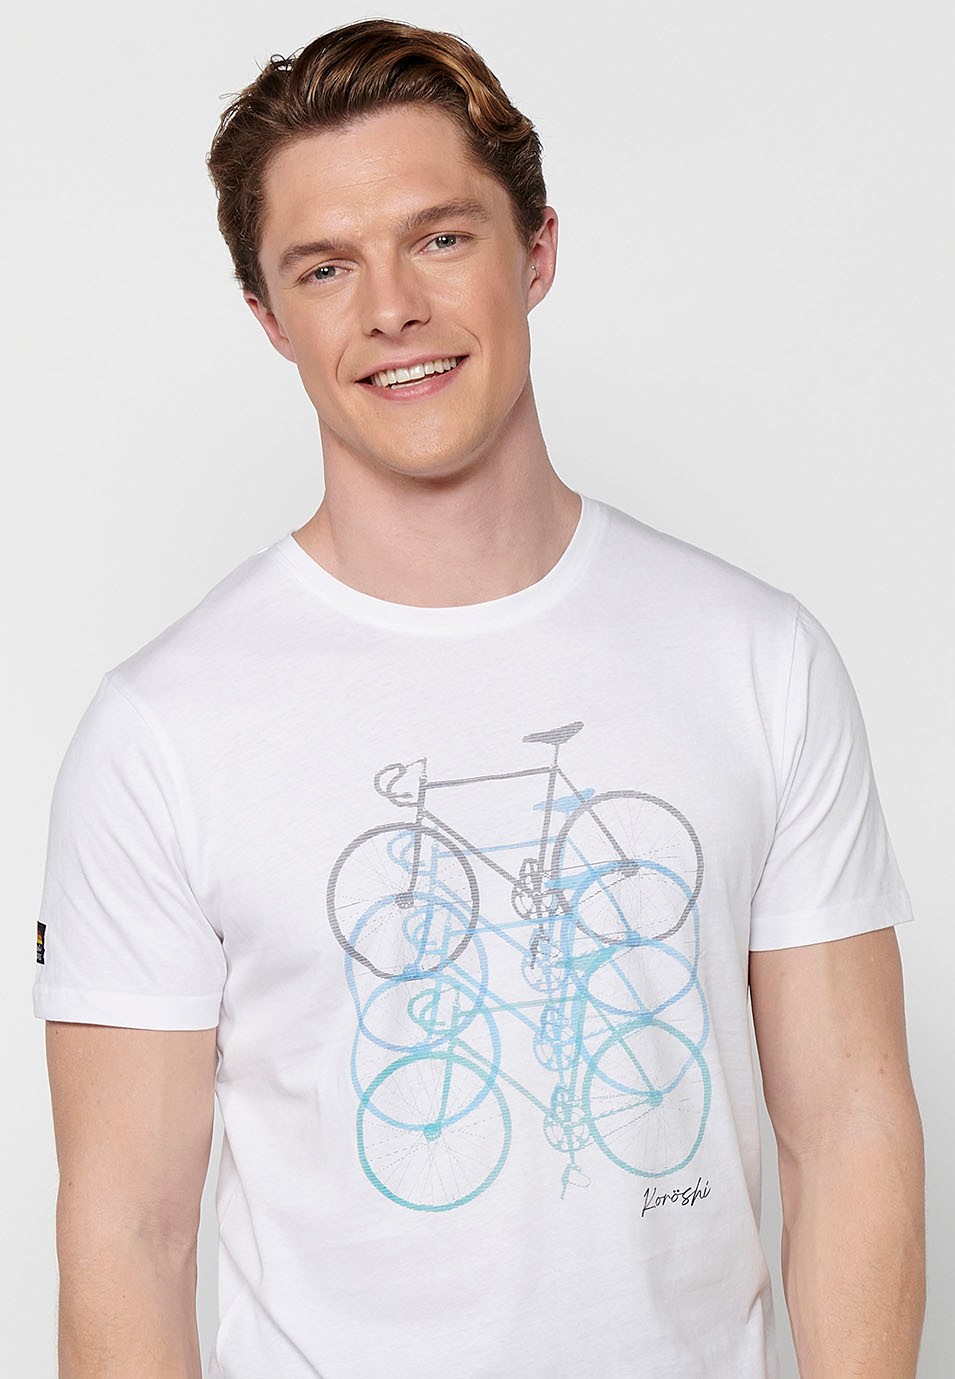 Short-sleeved cotton T-shirt with bicycle front print, white for men